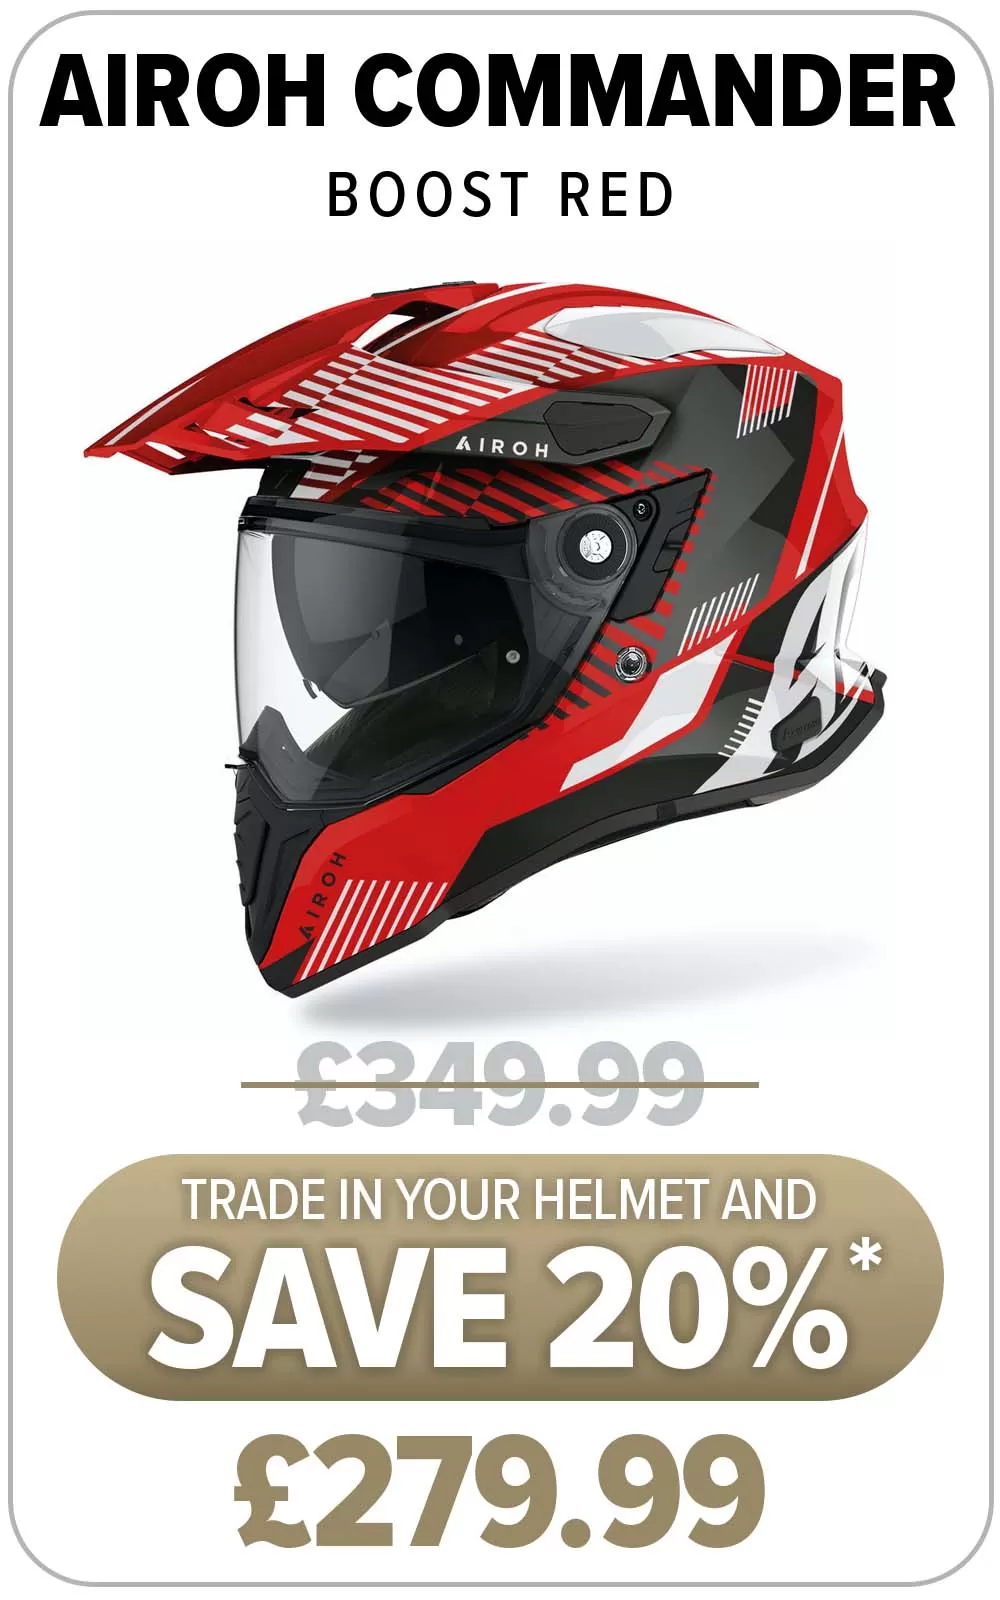 Enjoy up to 25% off a new helmet when you trade in your old one! T&Cs apply. Only at Laguna Motorcycles.